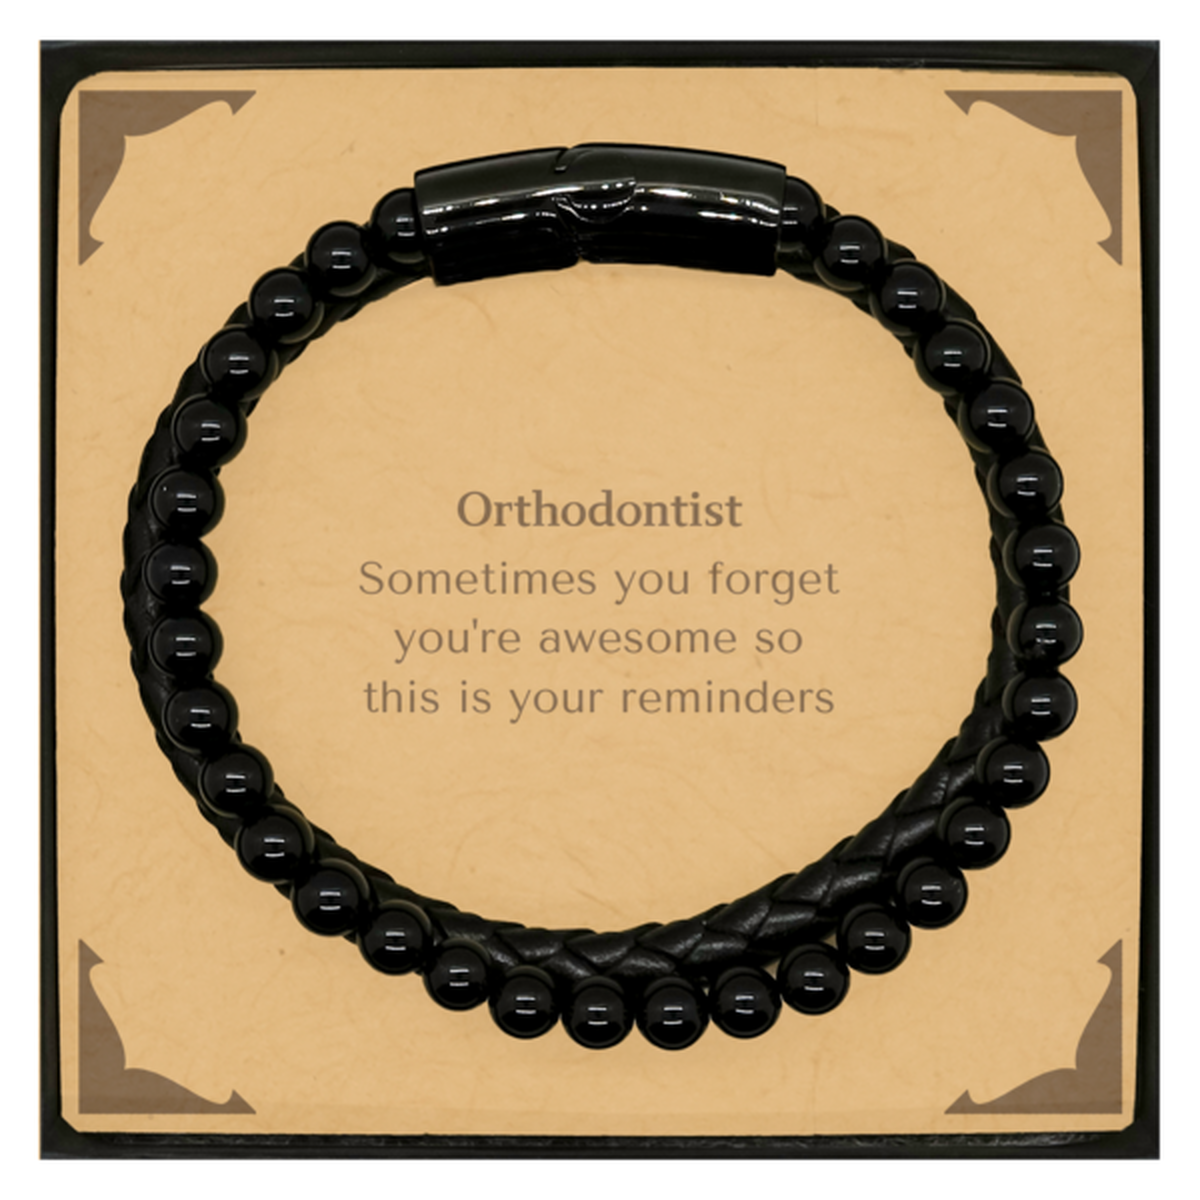 Sentimental Orthodontist Stone Leather Bracelets, Orthodontist Sometimes you forget you're awesome so this is your reminders, Graduation Christmas Birthday Gifts for Orthodontist, Men, Women, Coworkers